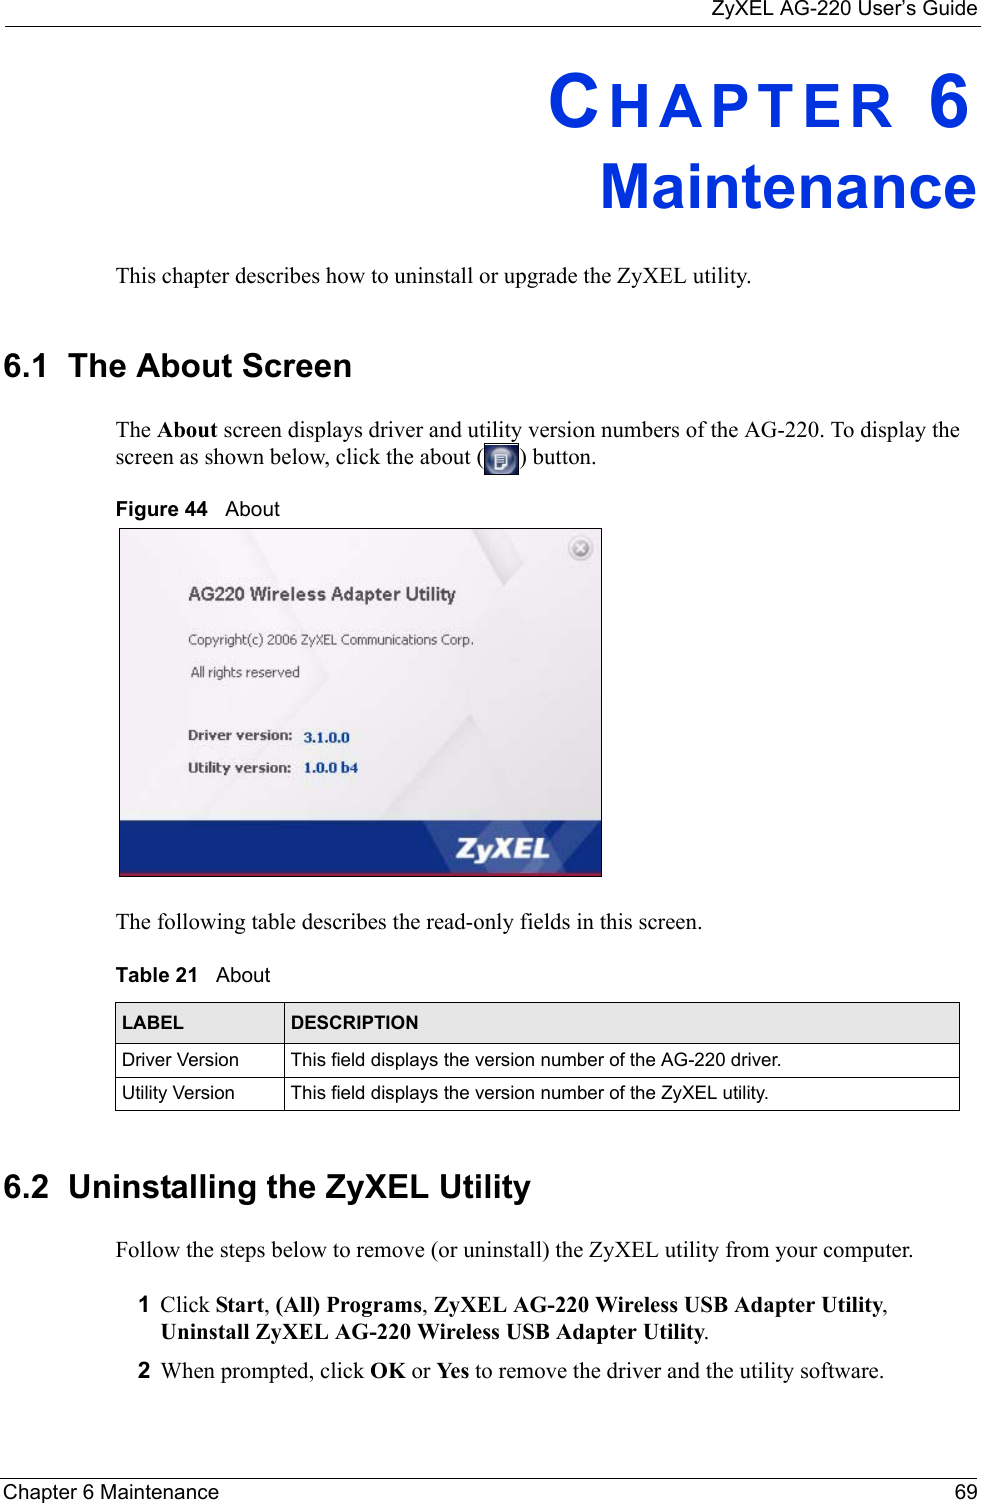 ZyXEL AG-220 User’s GuideChapter 6 Maintenance 69CHAPTER 6MaintenanceThis chapter describes how to uninstall or upgrade the ZyXEL utility.6.1  The About Screen The About screen displays driver and utility version numbers of the AG-220. To display the screen as shown below, click the about ( ) button.Figure 44   About The following table describes the read-only fields in this screen. 6.2  Uninstalling the ZyXEL Utility Follow the steps below to remove (or uninstall) the ZyXEL utility from your computer.1Click Start, (All) Programs, ZyXEL AG-220 Wireless USB Adapter Utility, Uninstall ZyXEL AG-220 Wireless USB Adapter Utility.2When prompted, click OK or Yes  to remove the driver and the utility software.Table 21   About LABEL DESCRIPTIONDriver Version This field displays the version number of the AG-220 driver.Utility Version This field displays the version number of the ZyXEL utility.